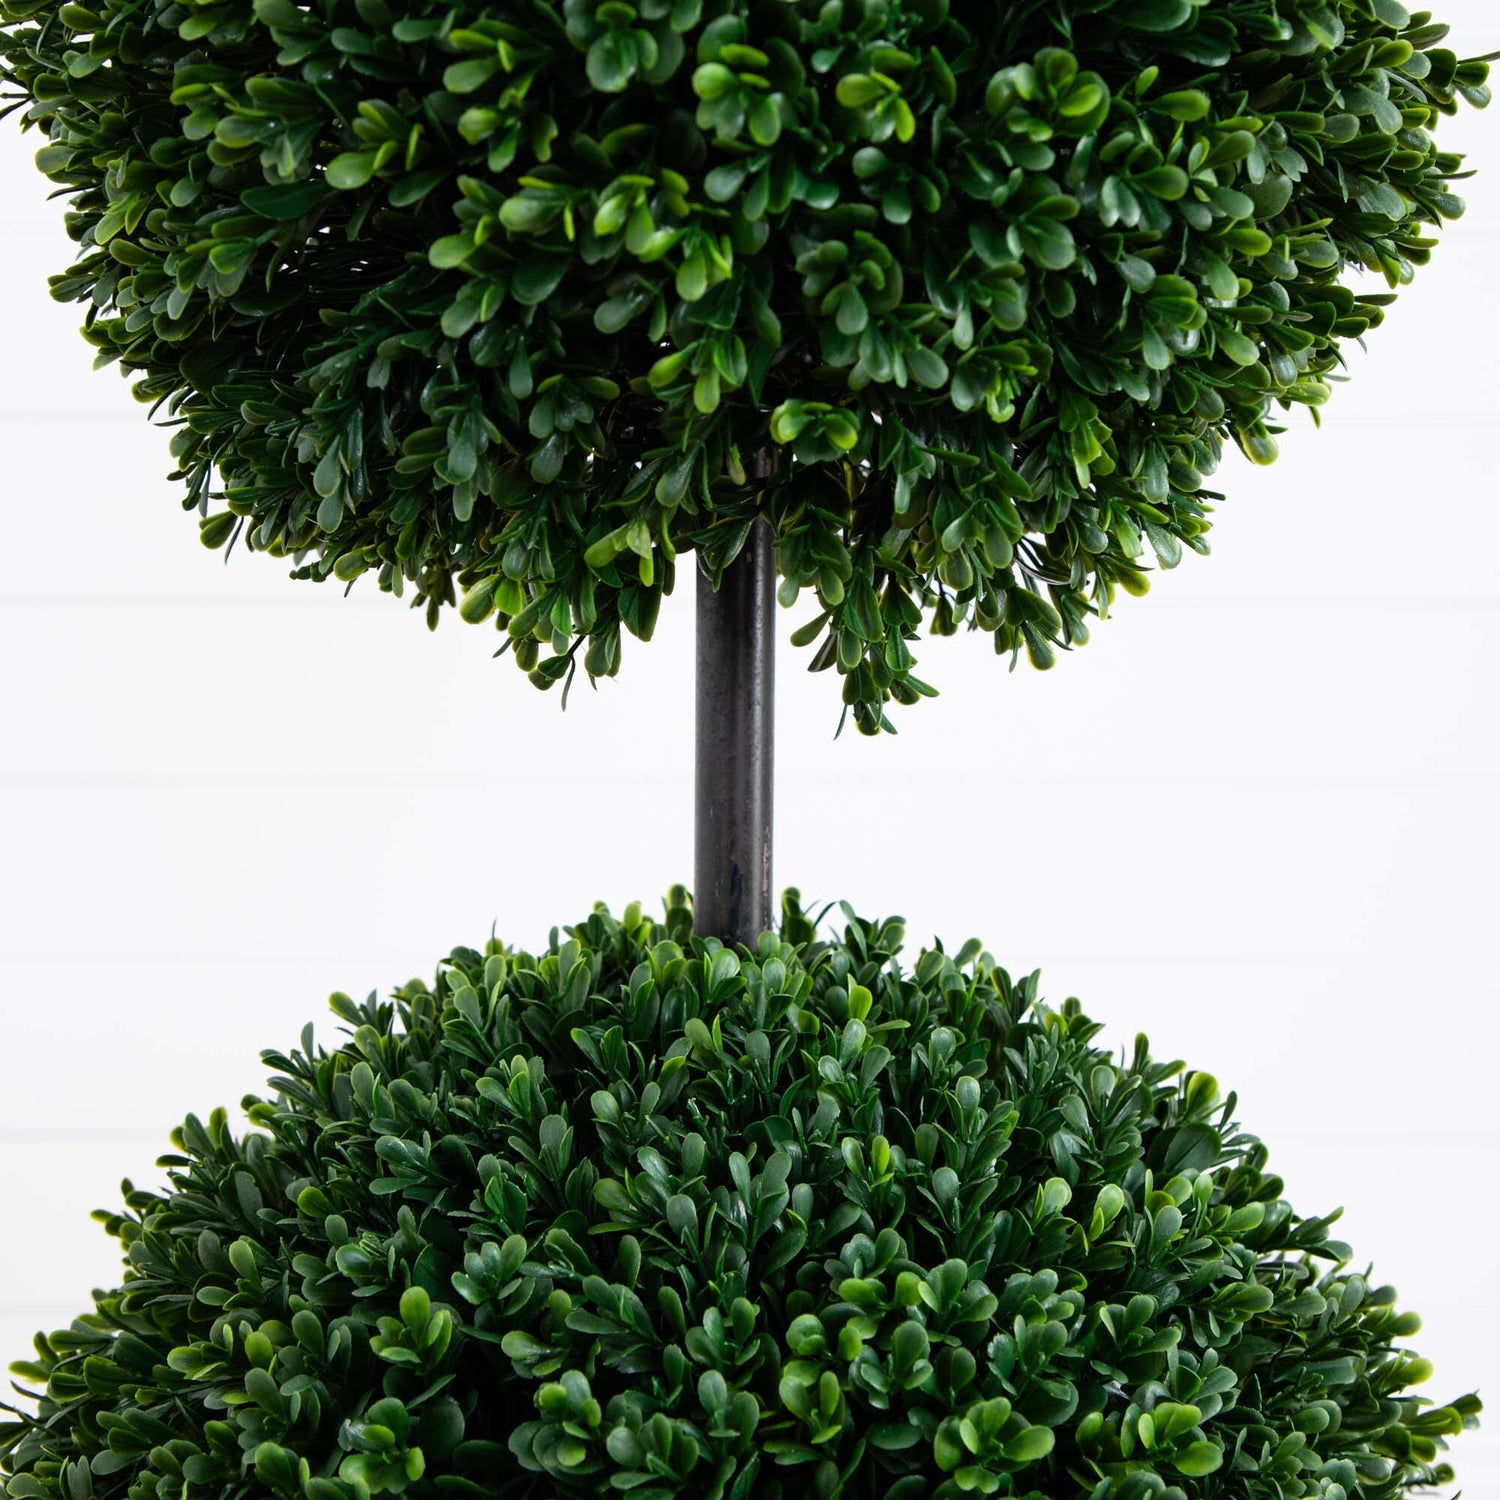 3.5’ Boxwood Double Ball Artificial Topiary Tree UV Resistant (Indoor/Outdoor)